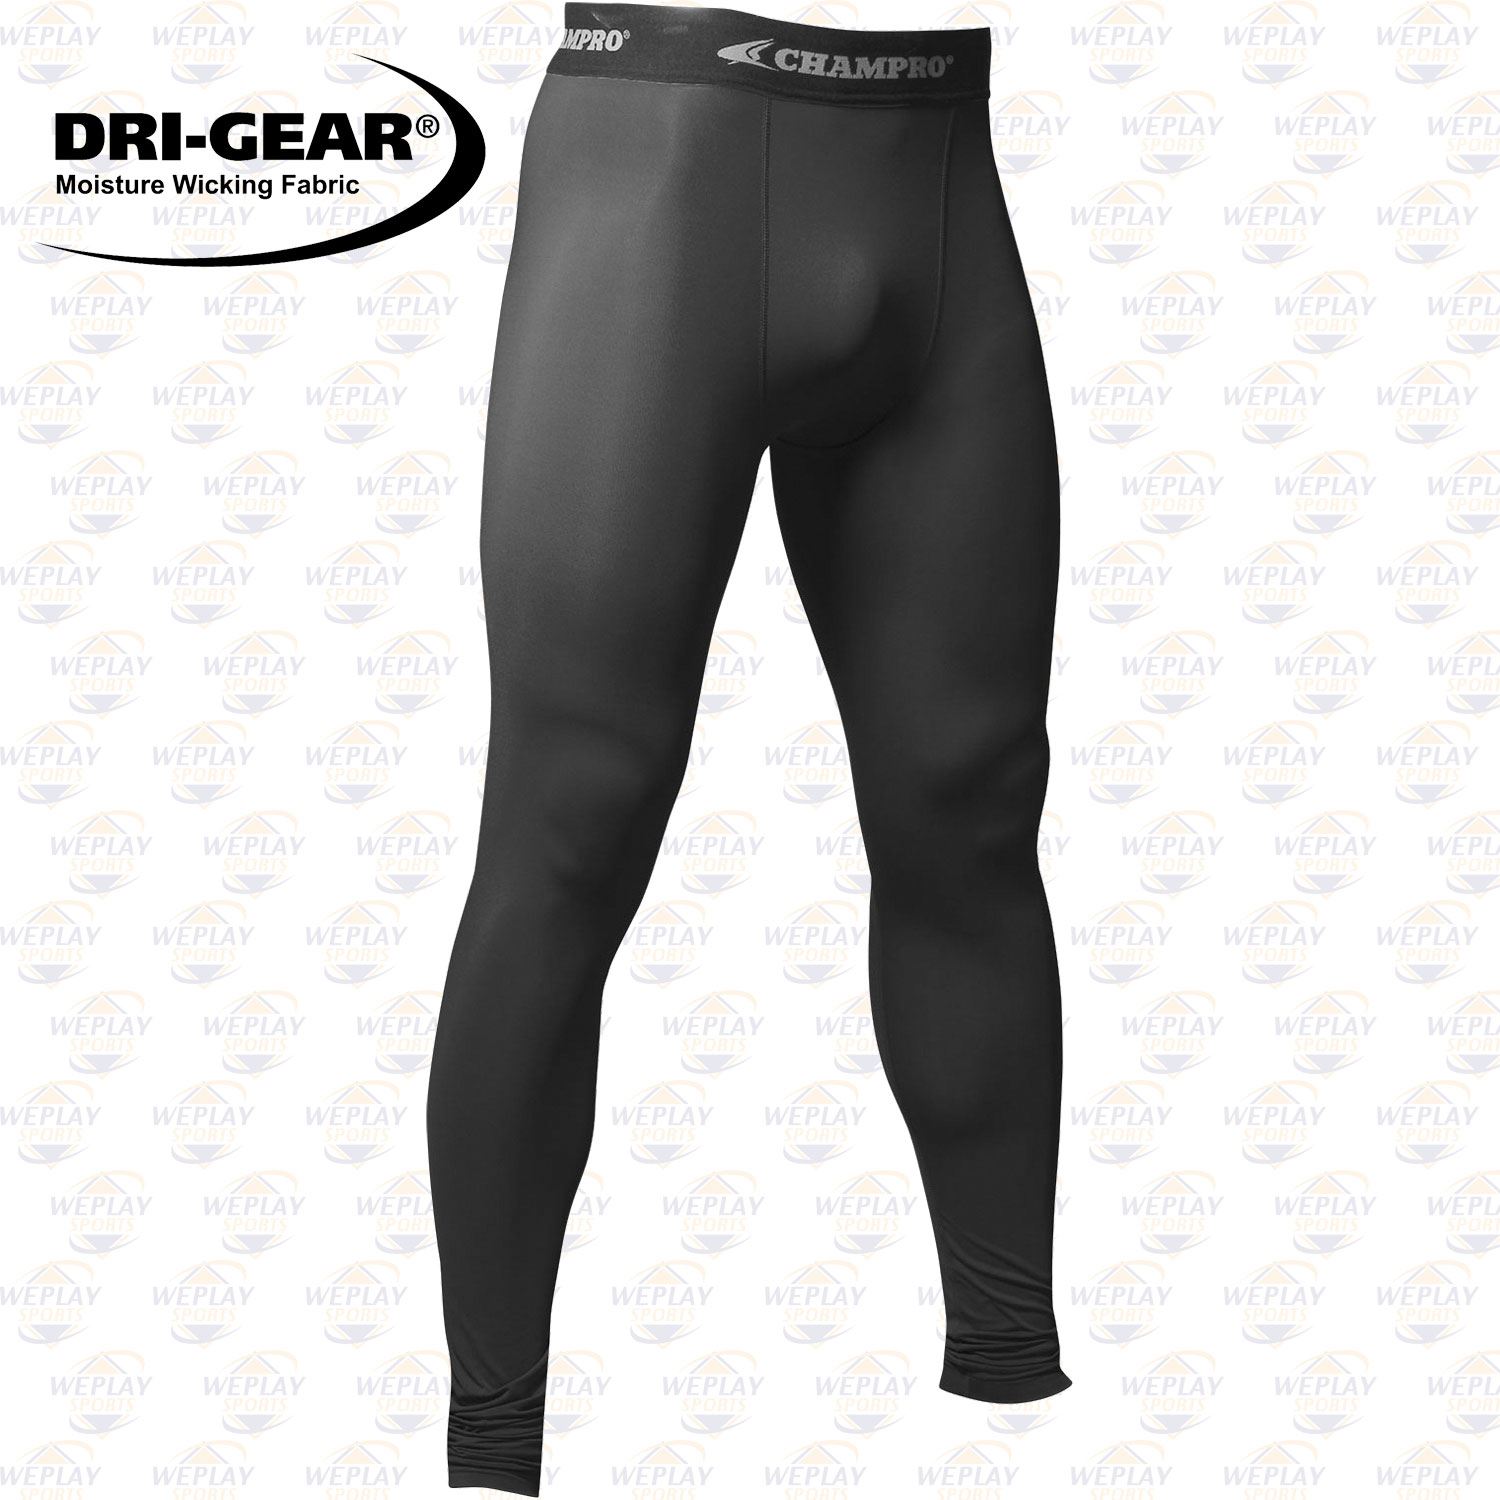 CS5 Champro Compression Tight Youth Sizes Various Colors Available 